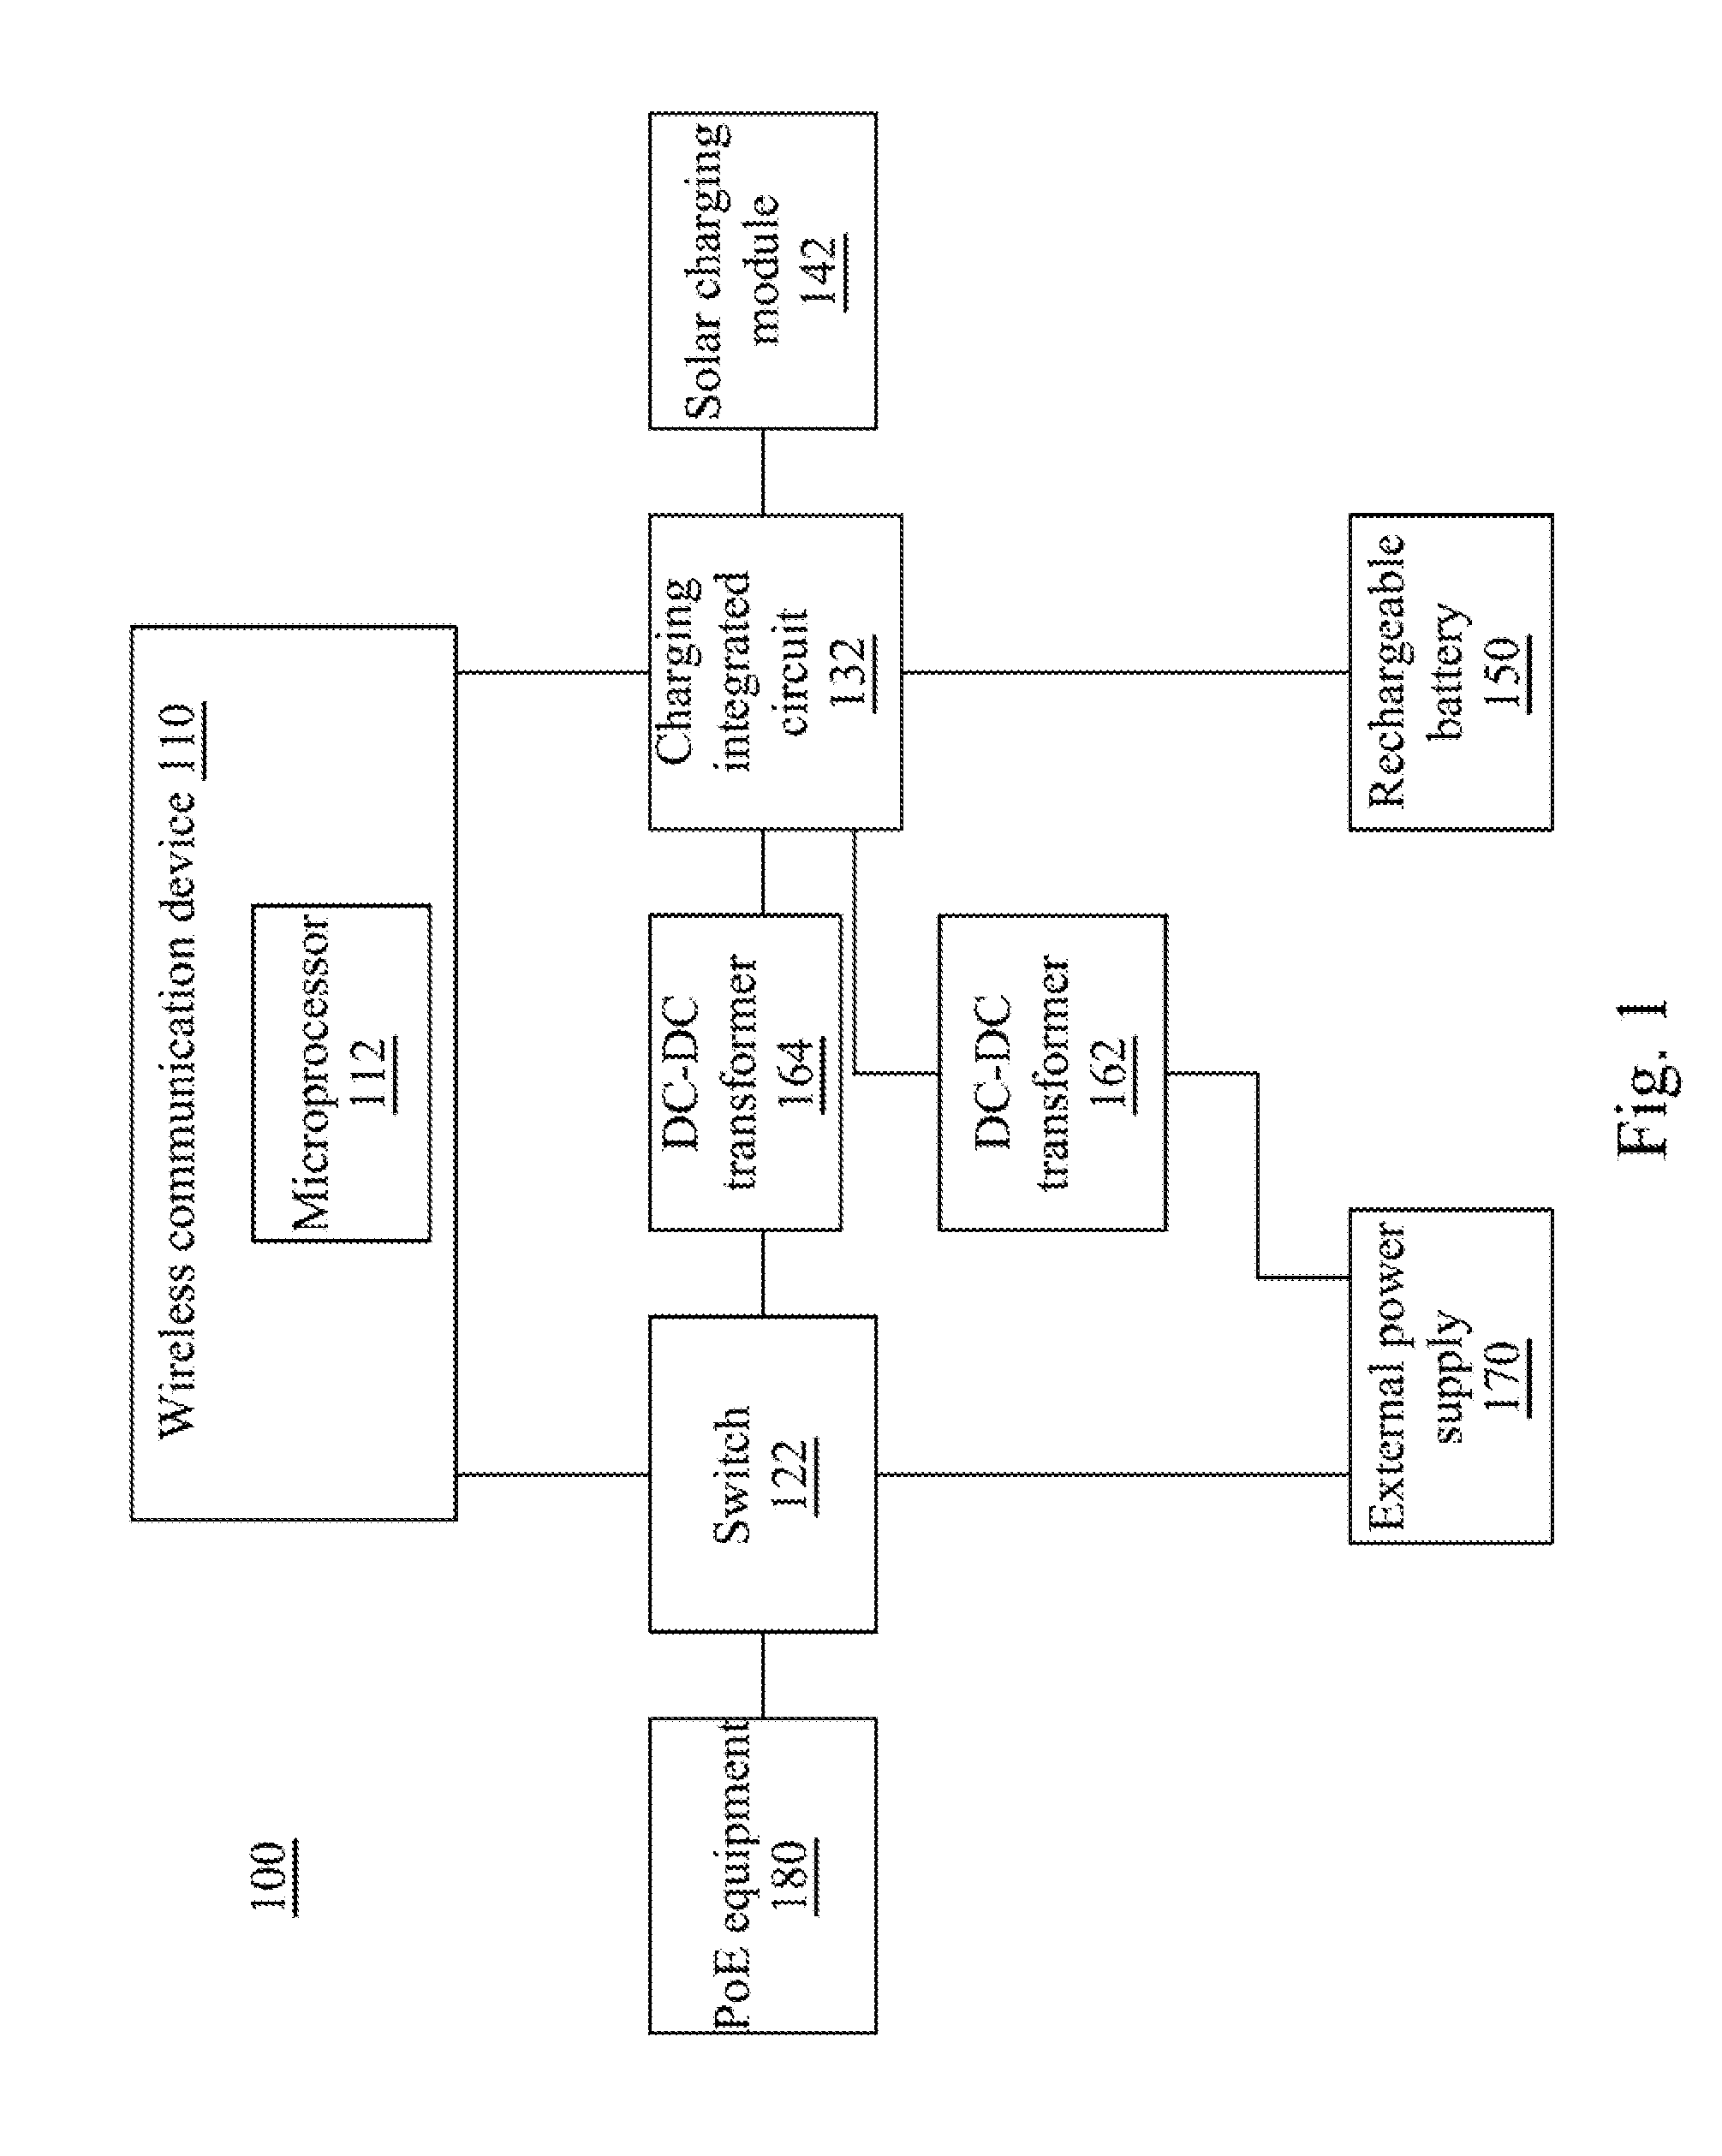 Power supply system of wireless communication device